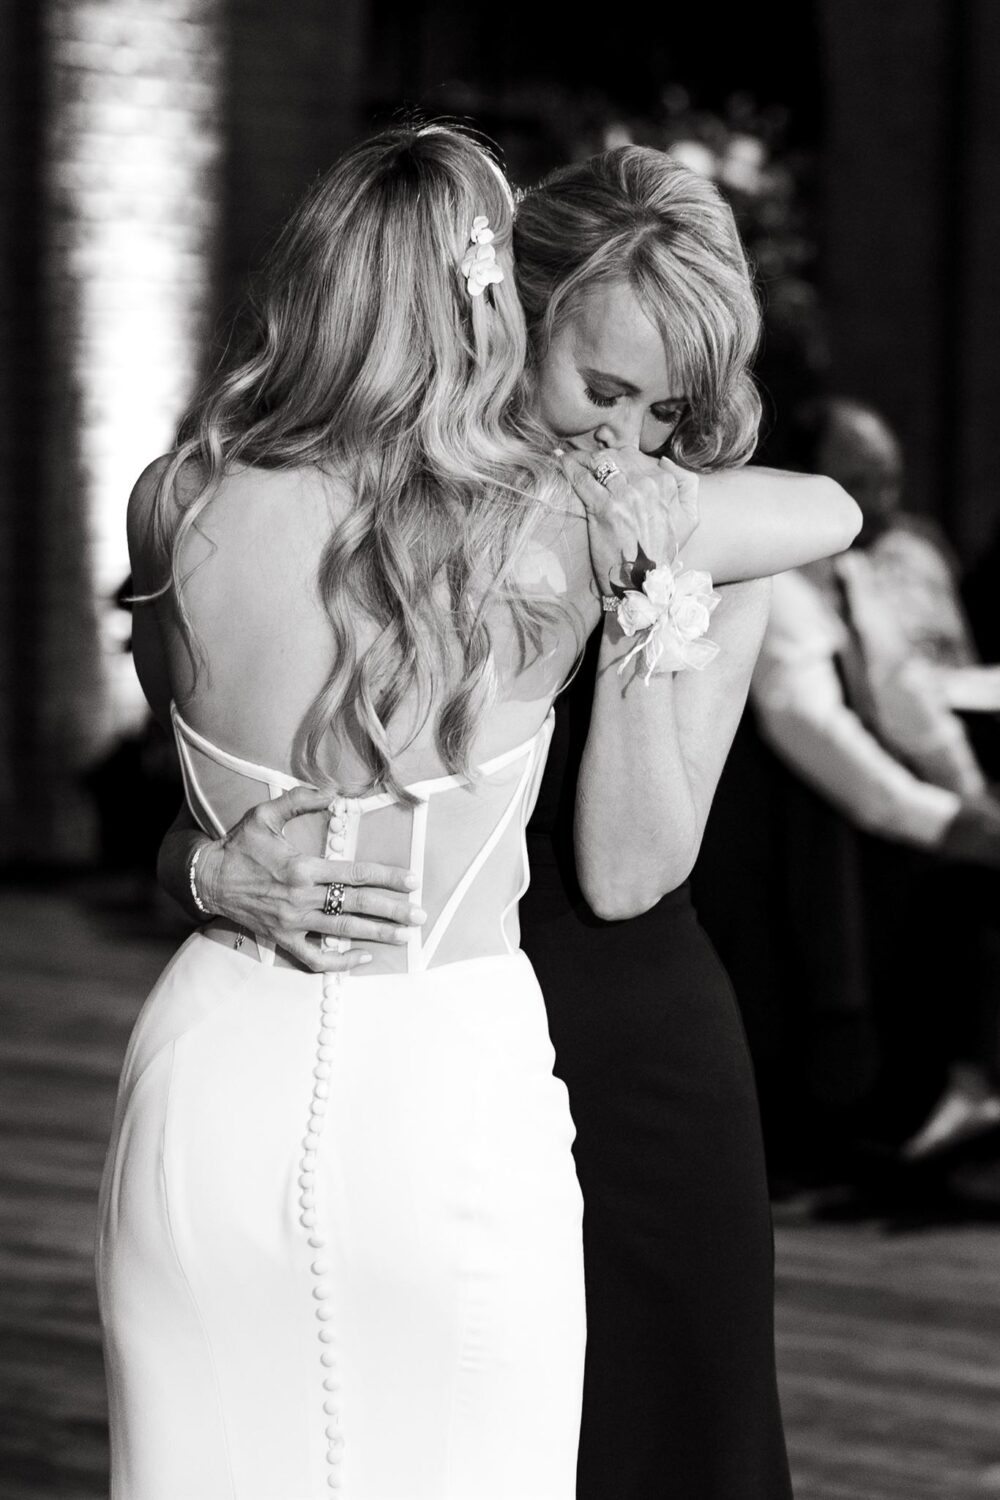 mother daughter dance wedding black and white portrait Ways to Honor Your Mom on Your Wedding Day